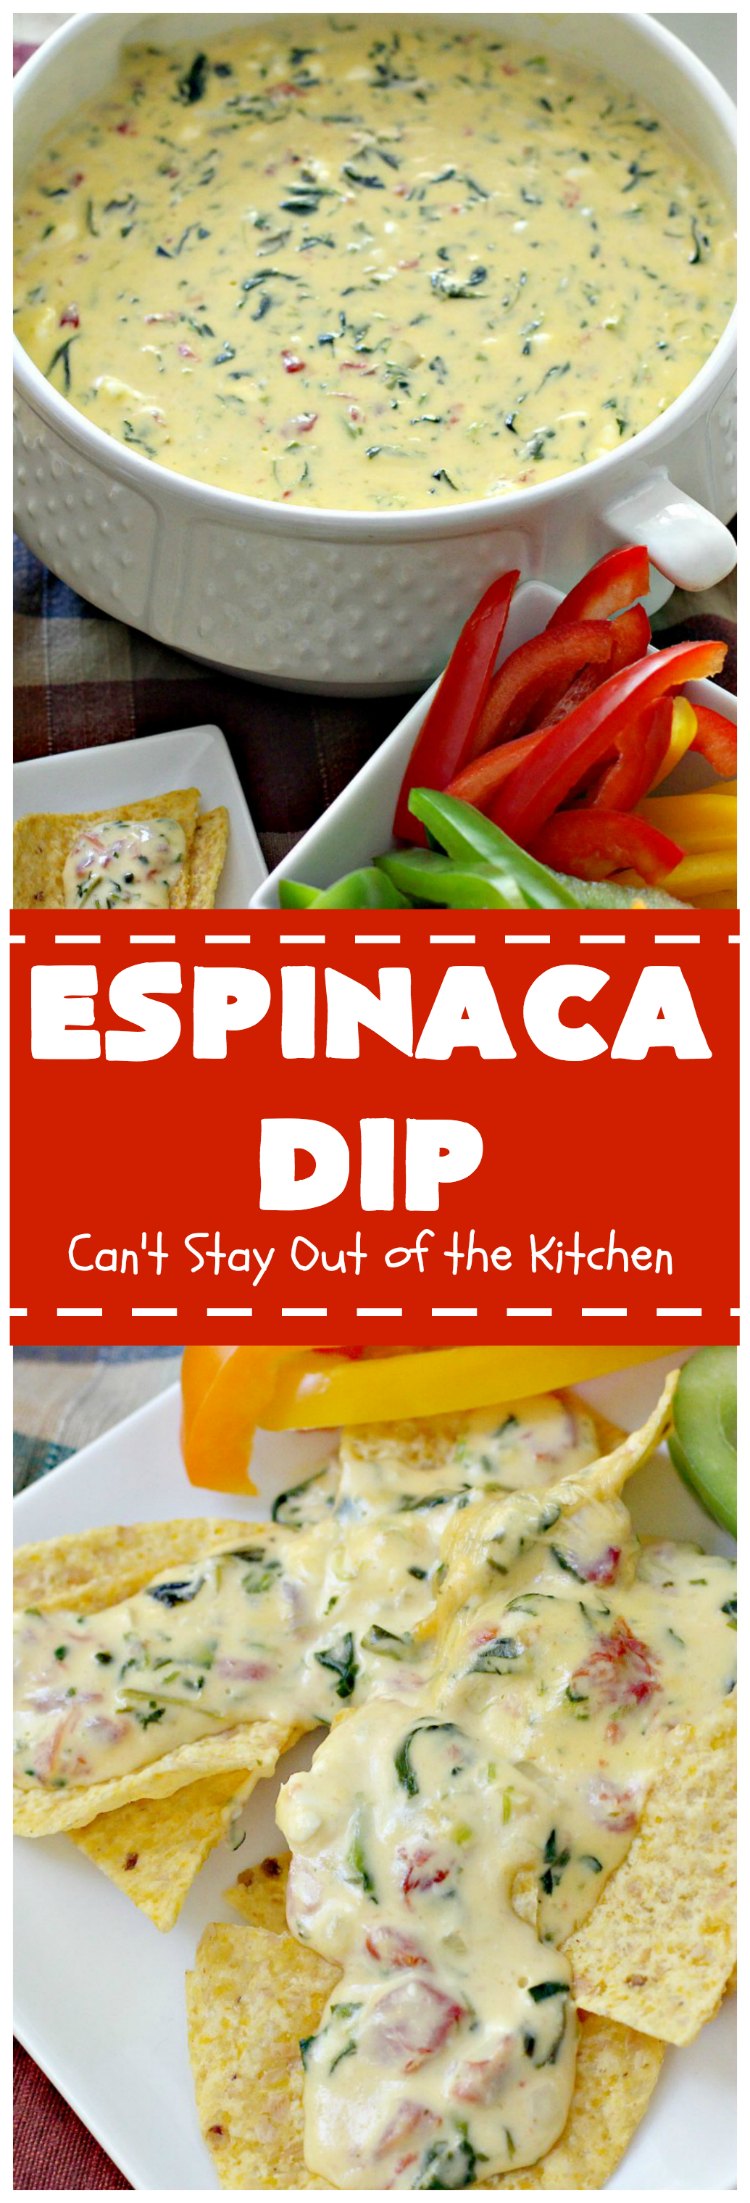 Espinaca Dip | Can't Stay Out of the Kitchen